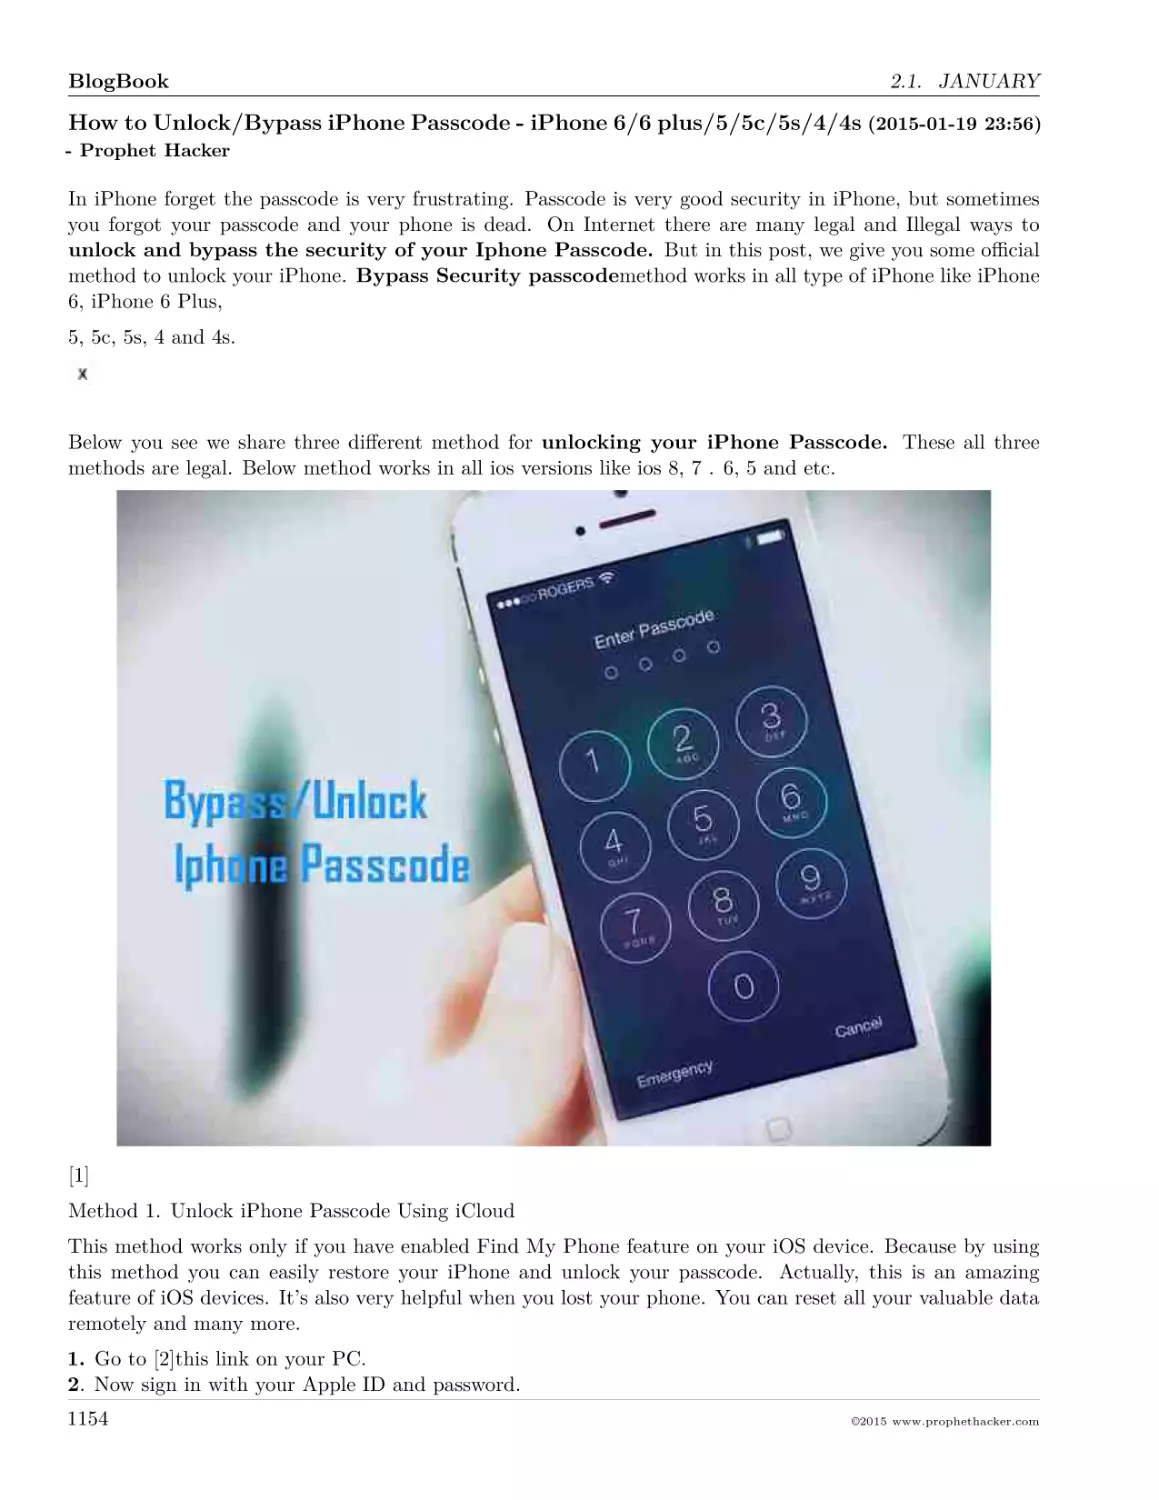 How to Unlock/Bypass iPhone Passcode - iPhone 6/6 plus/5/5c/5s/4/4s (2015-01-19 23